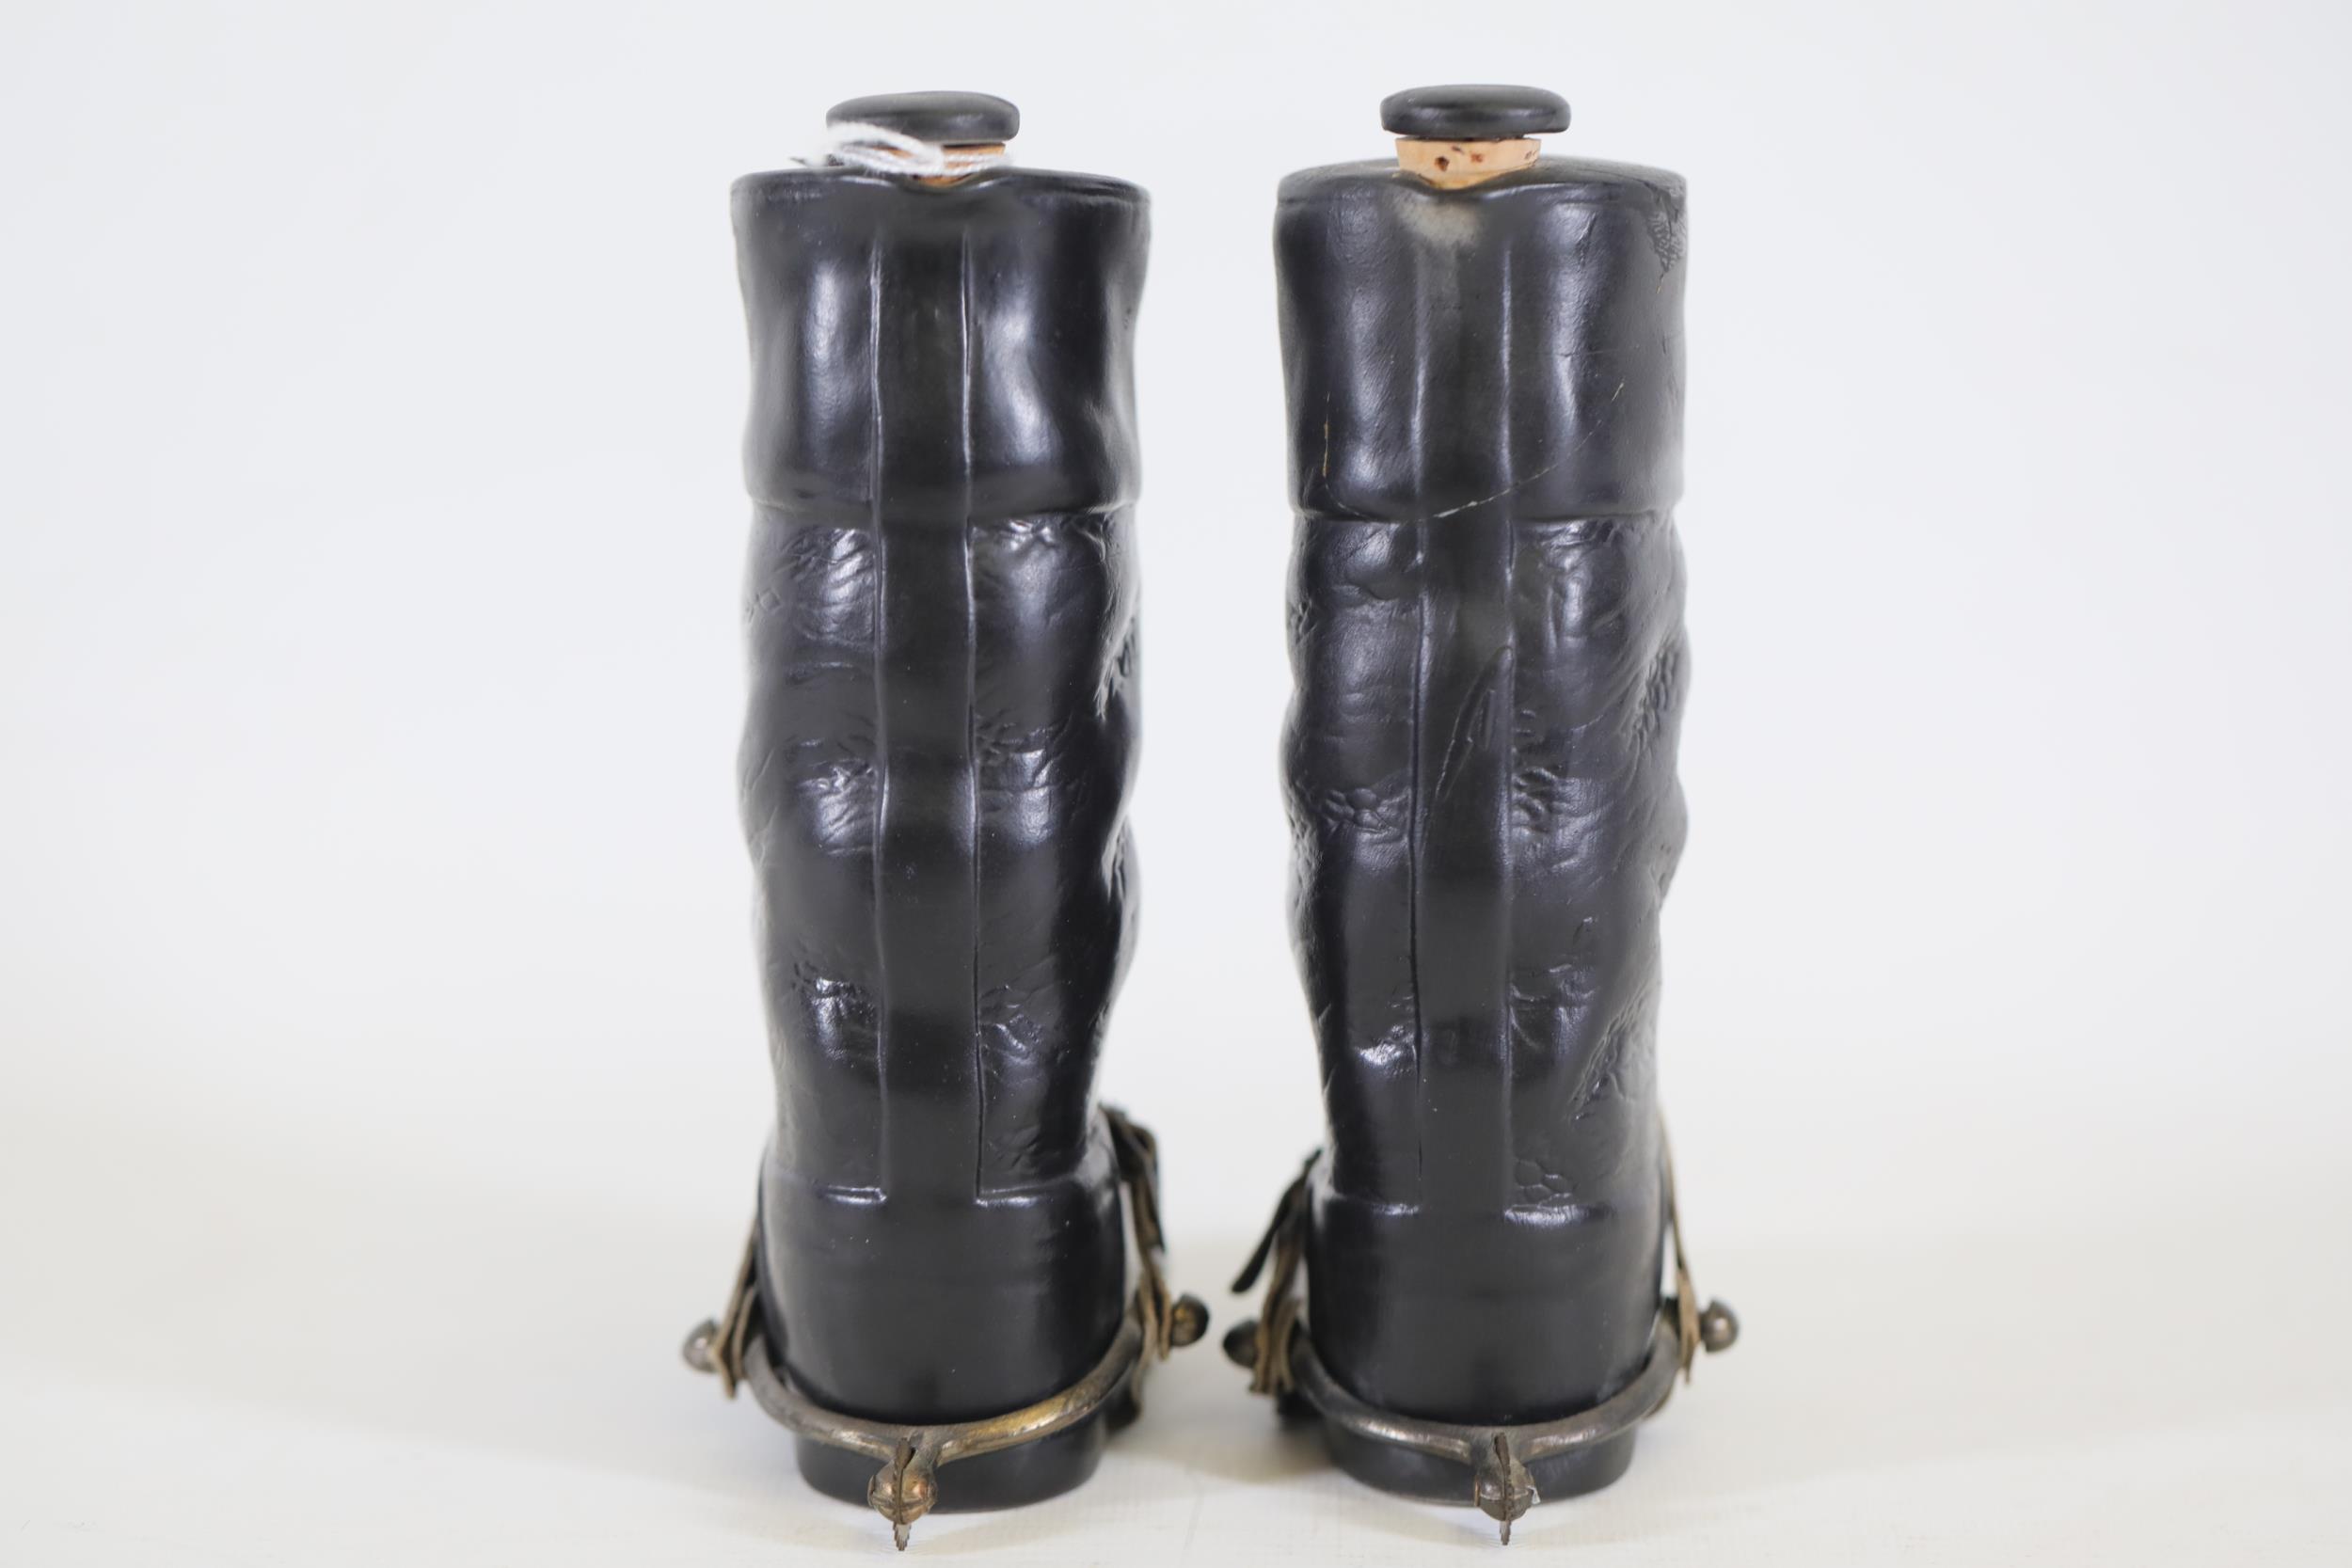 A Pair of ceramic hip flasks in the shape of riding boots - Image 6 of 8